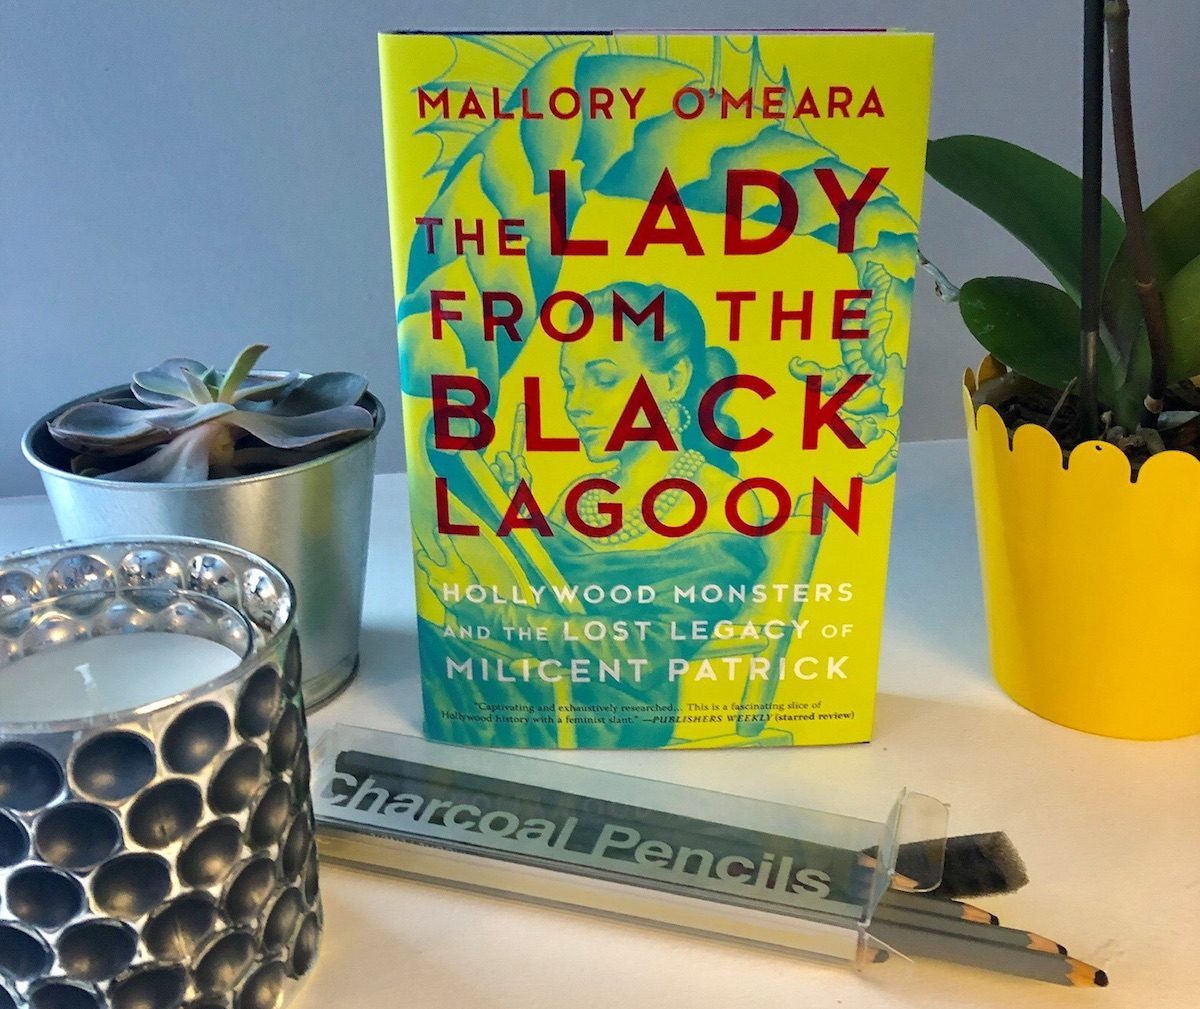 Lady from the Black Lagoon by Mallory O'Meara